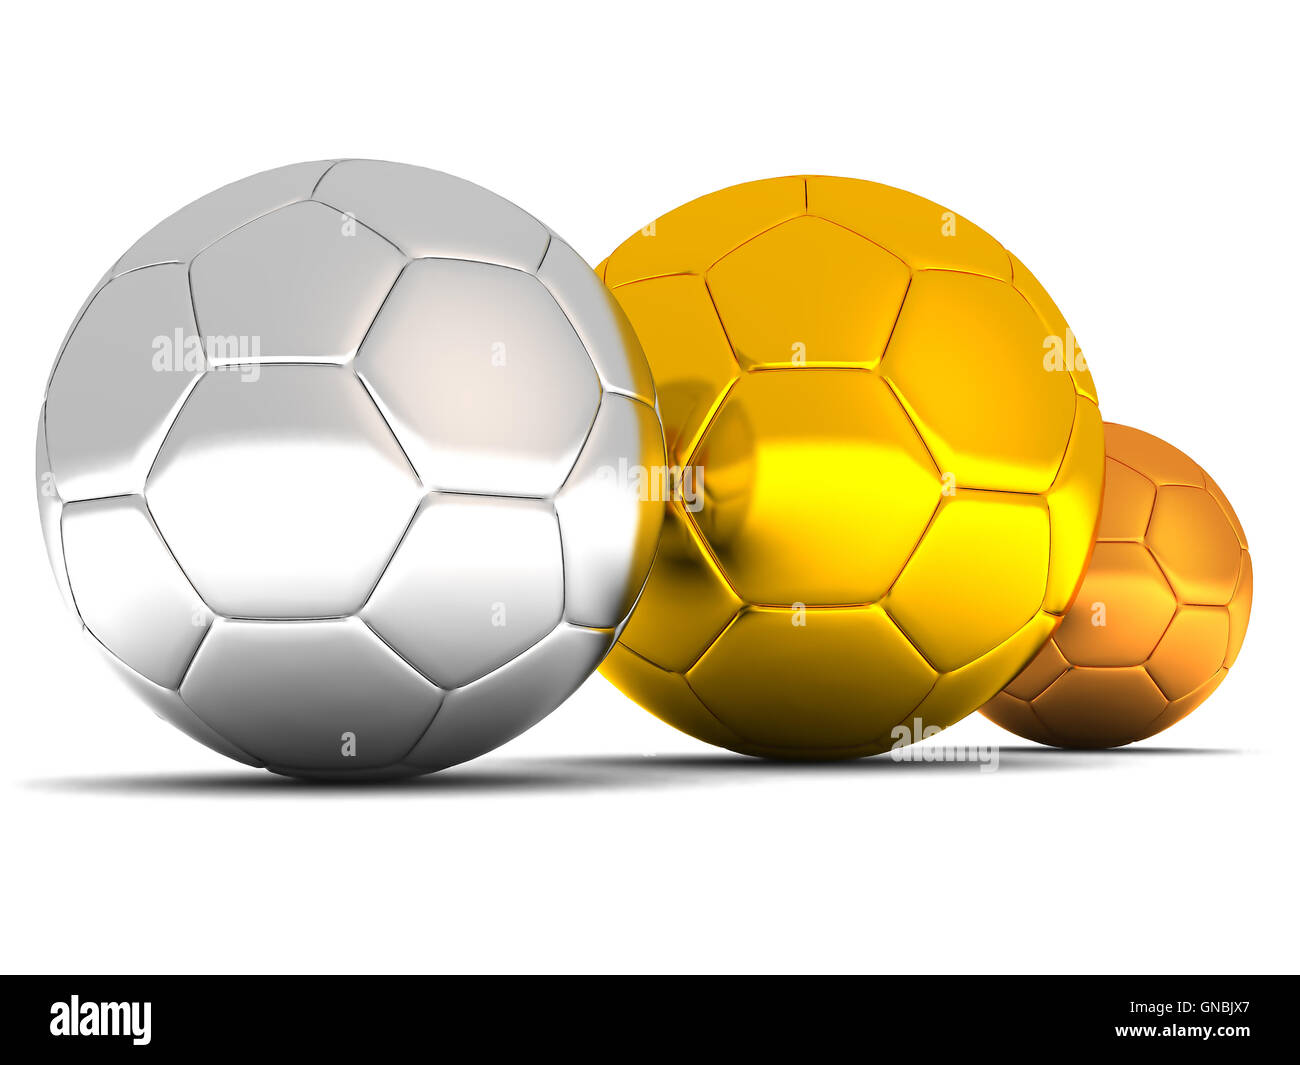 silver, gold and bronze soccer balls Stock Photo